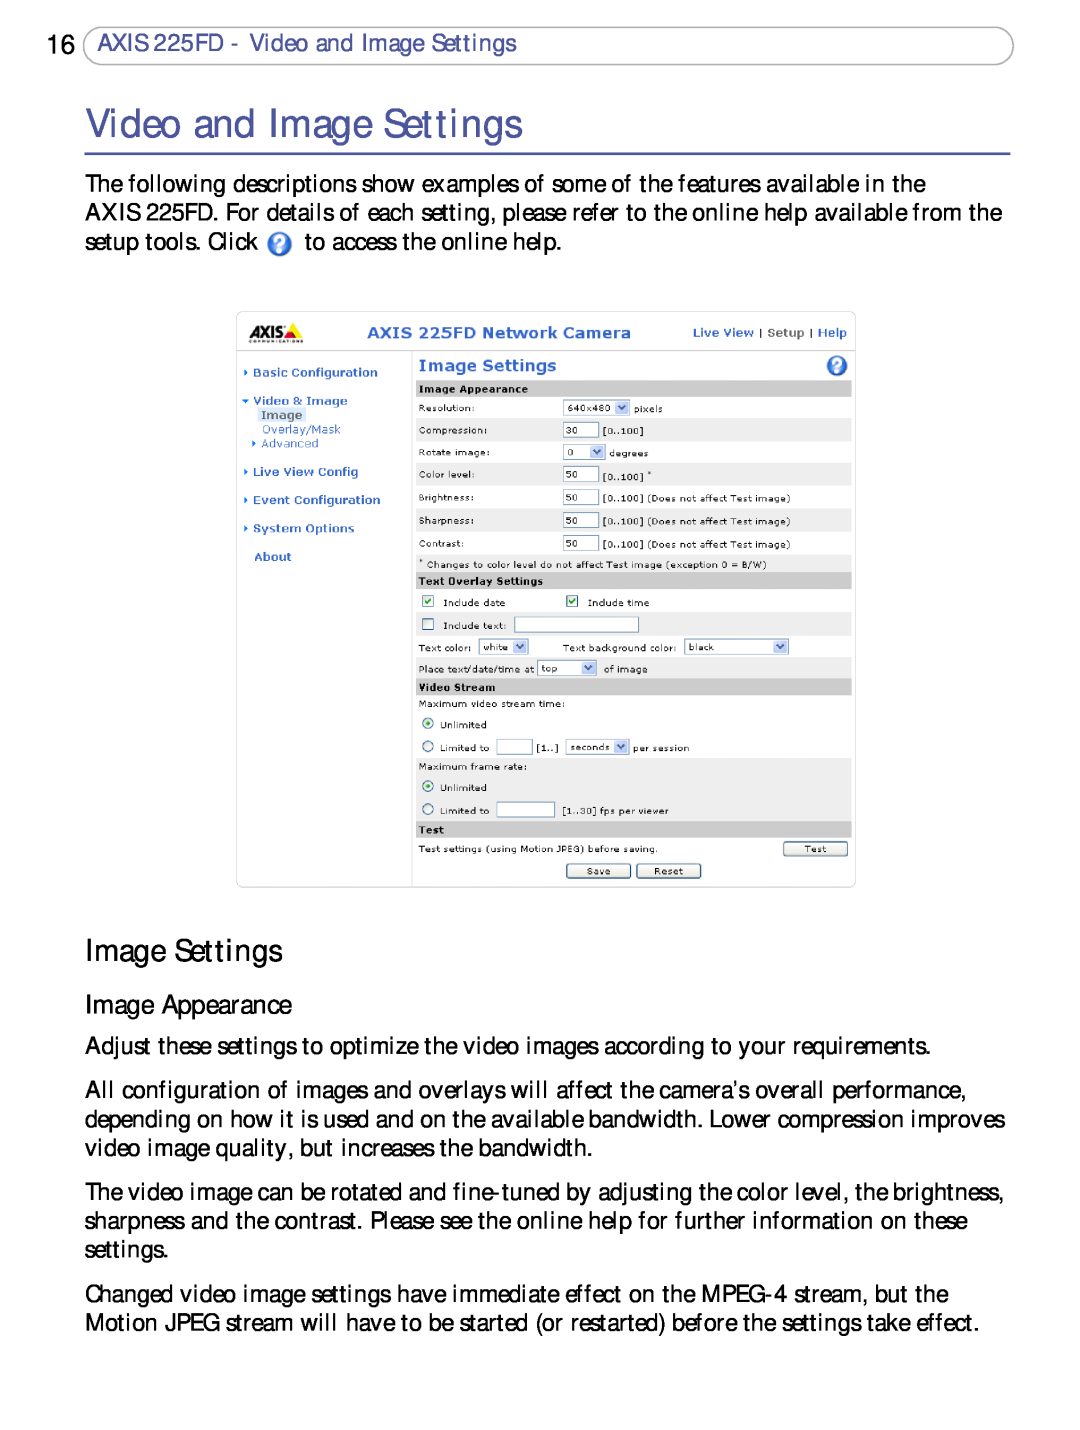 Axis Communications user manual Image Appearance, AXIS 225FD - Video and Image Settings 